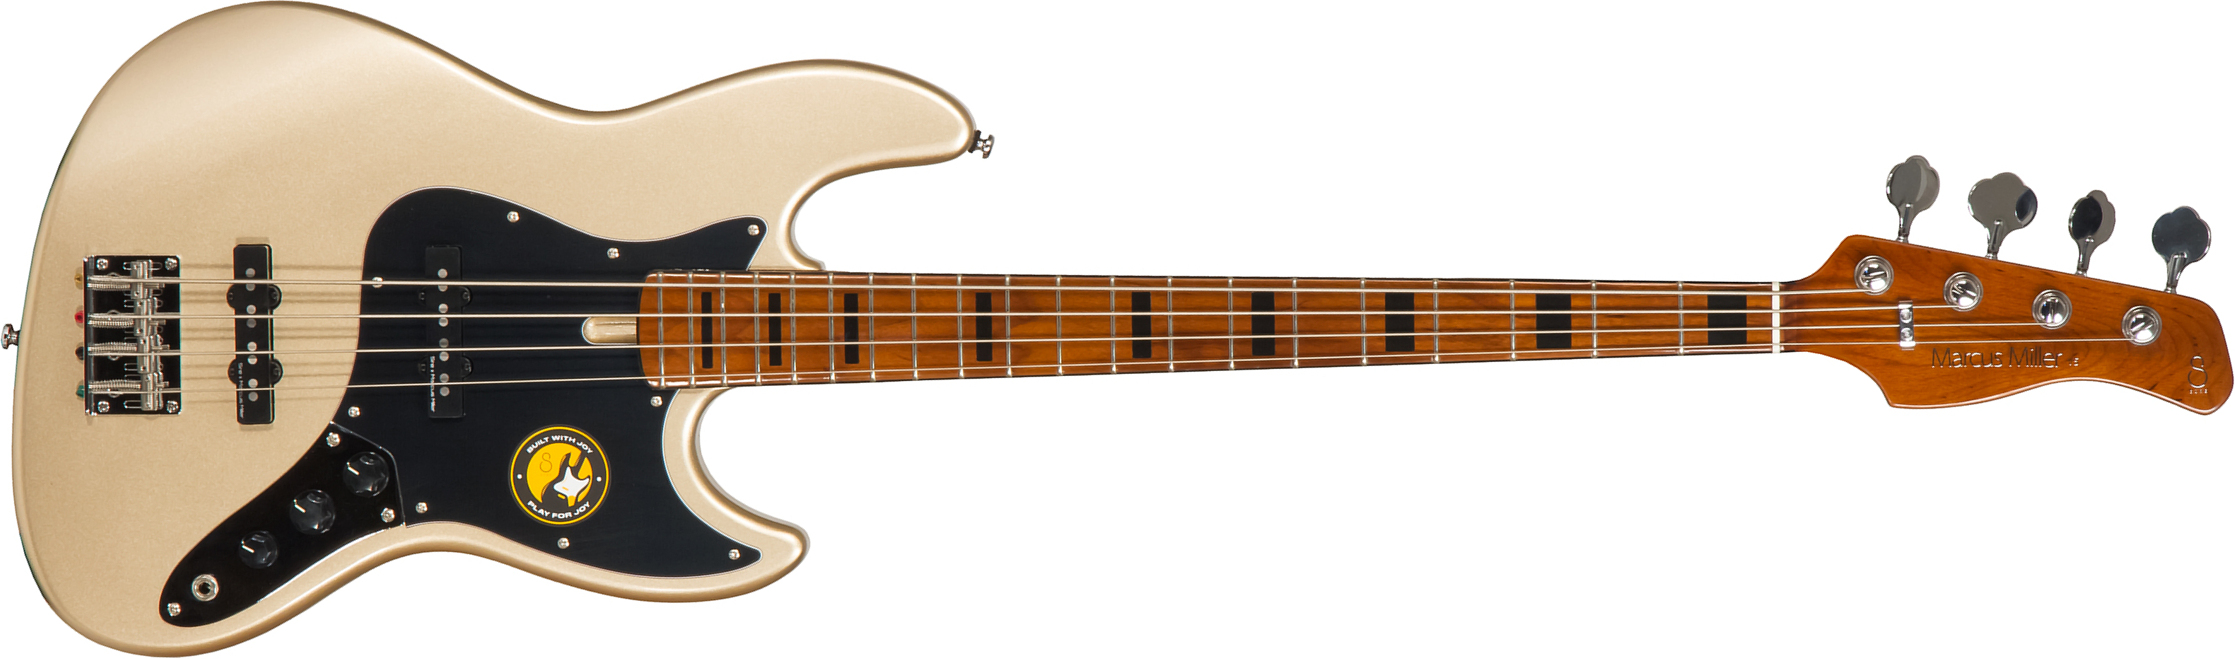 Marcus Miller V5 4st Mn - Champagne Gold Metallic - Solid body electric bass - Main picture